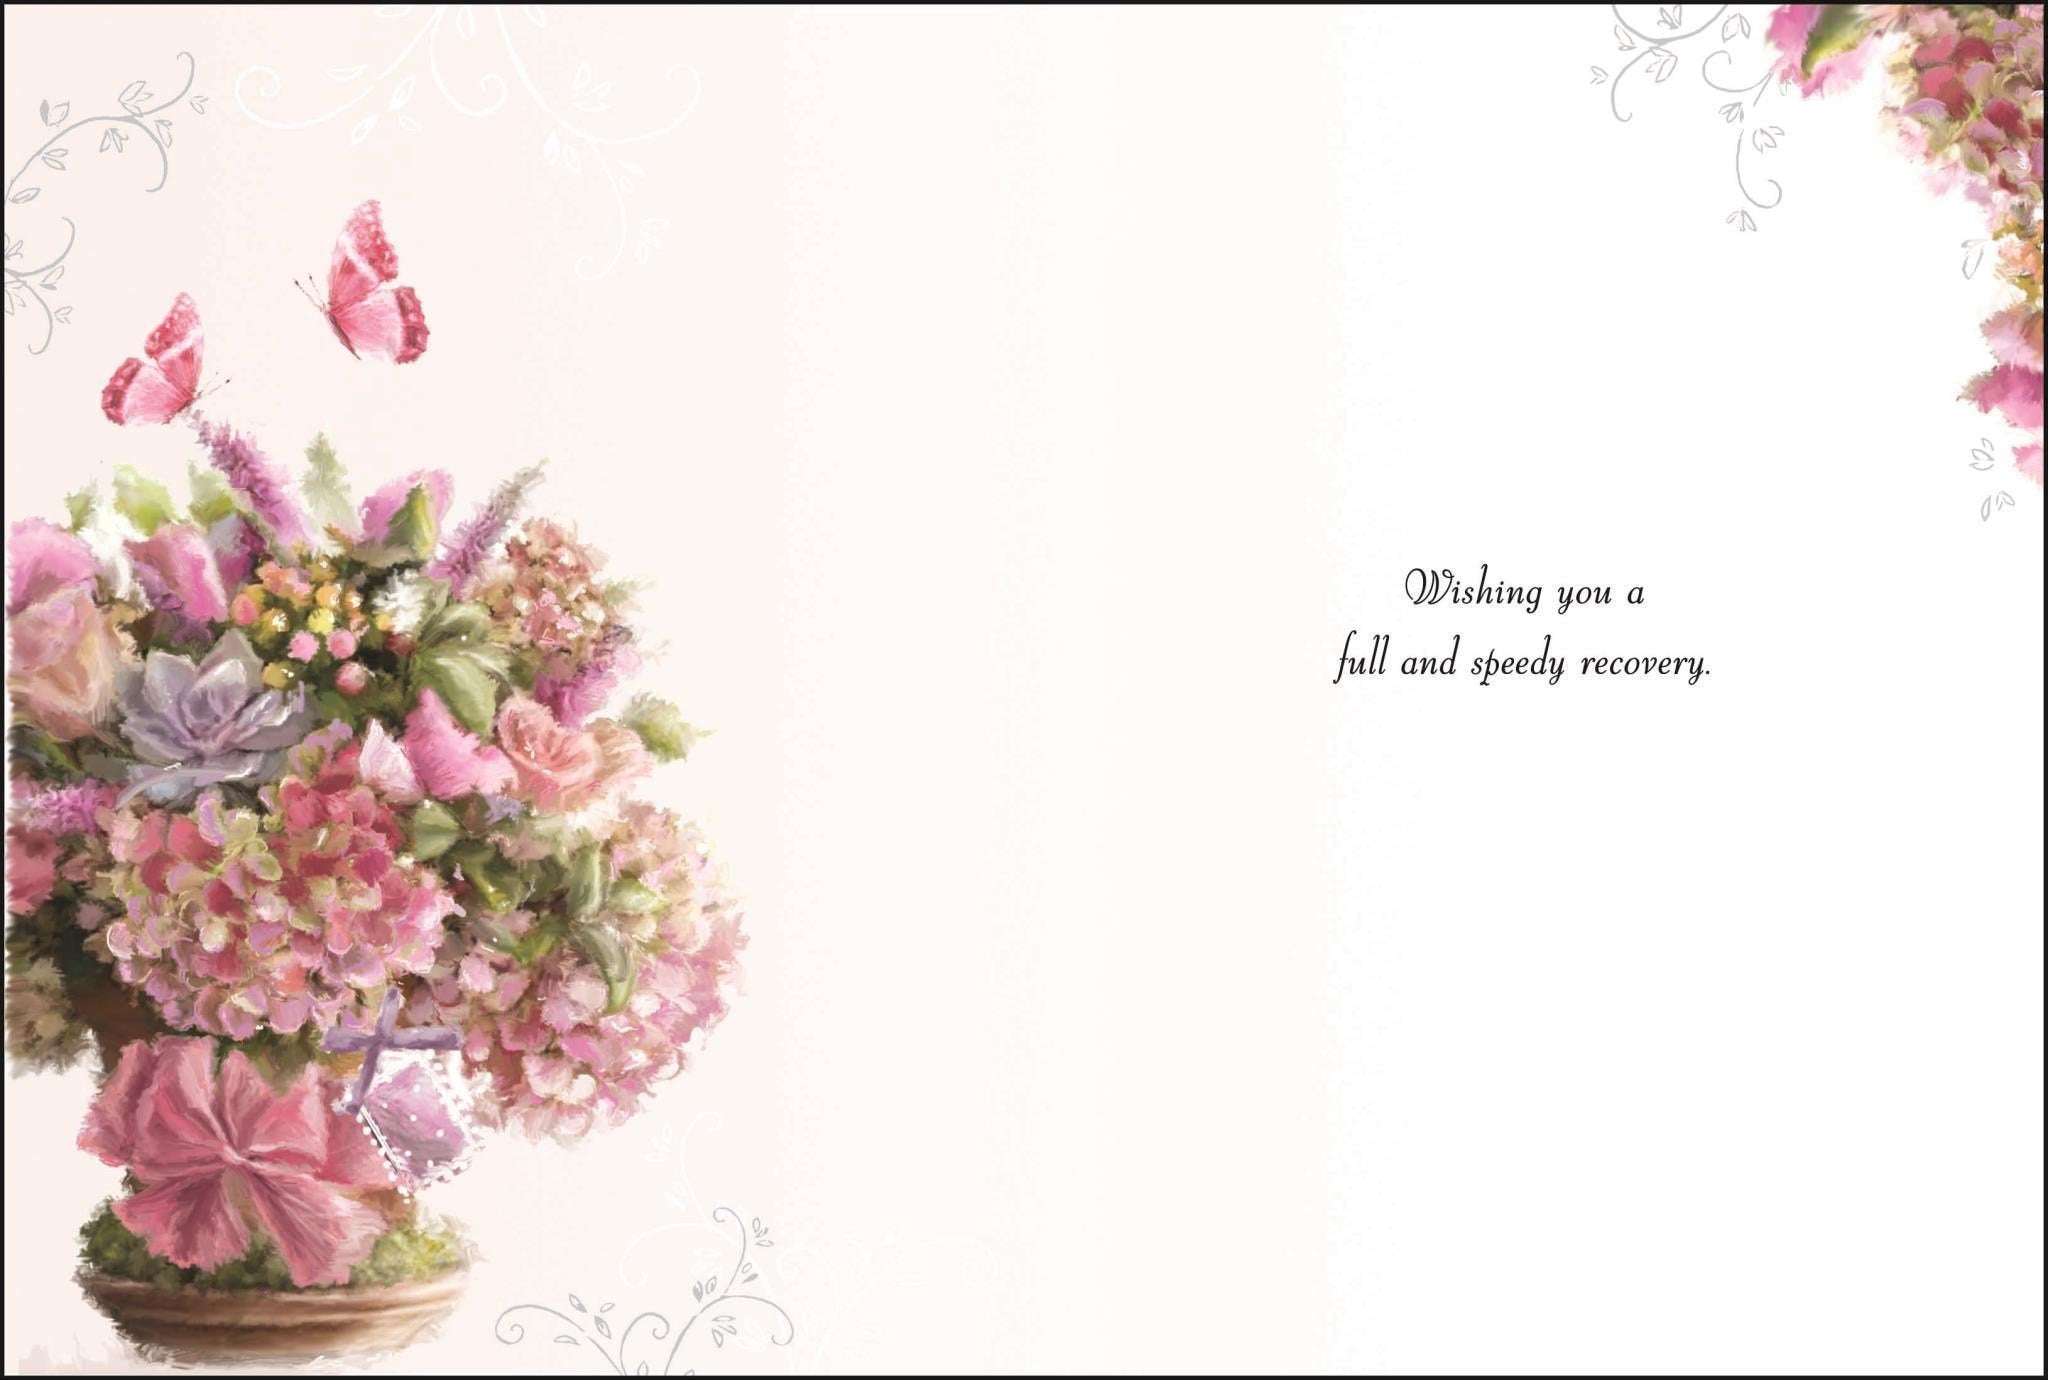 Inside of Get Well Wishes Bouquet Greetings Card